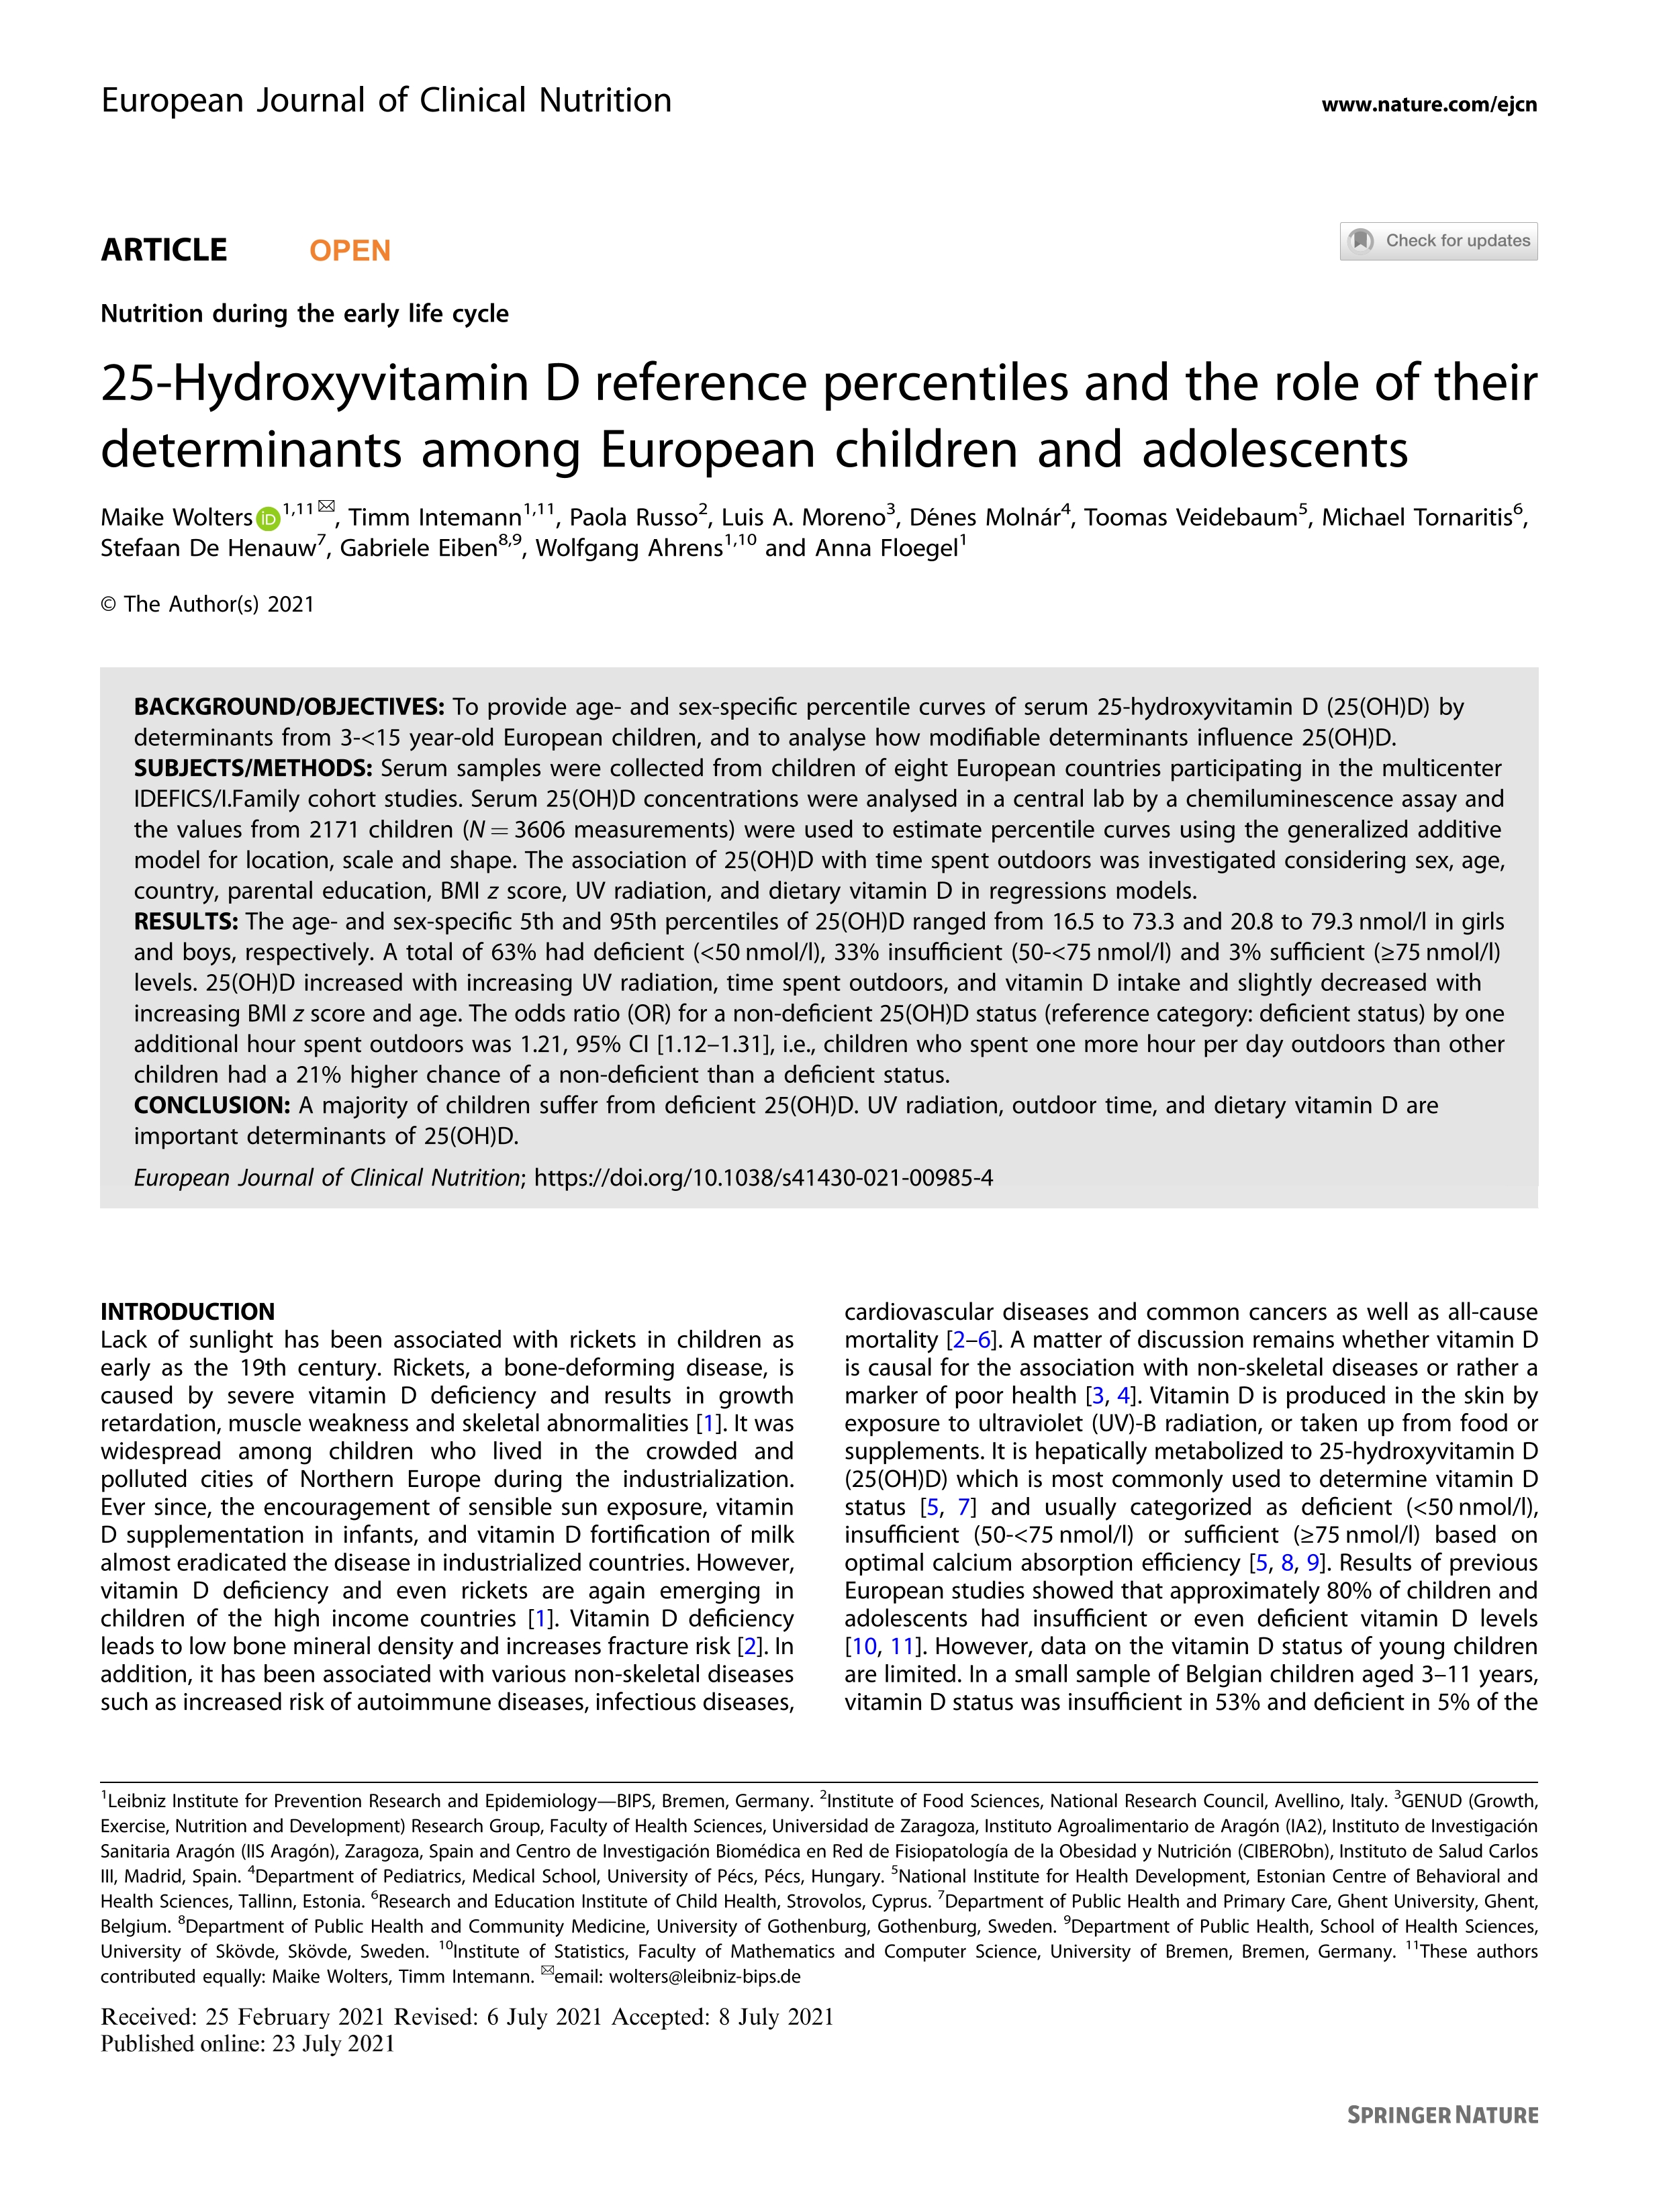 25-Hydroxyvitamin D reference percentiles and the role of their determinants among European children and adolescents